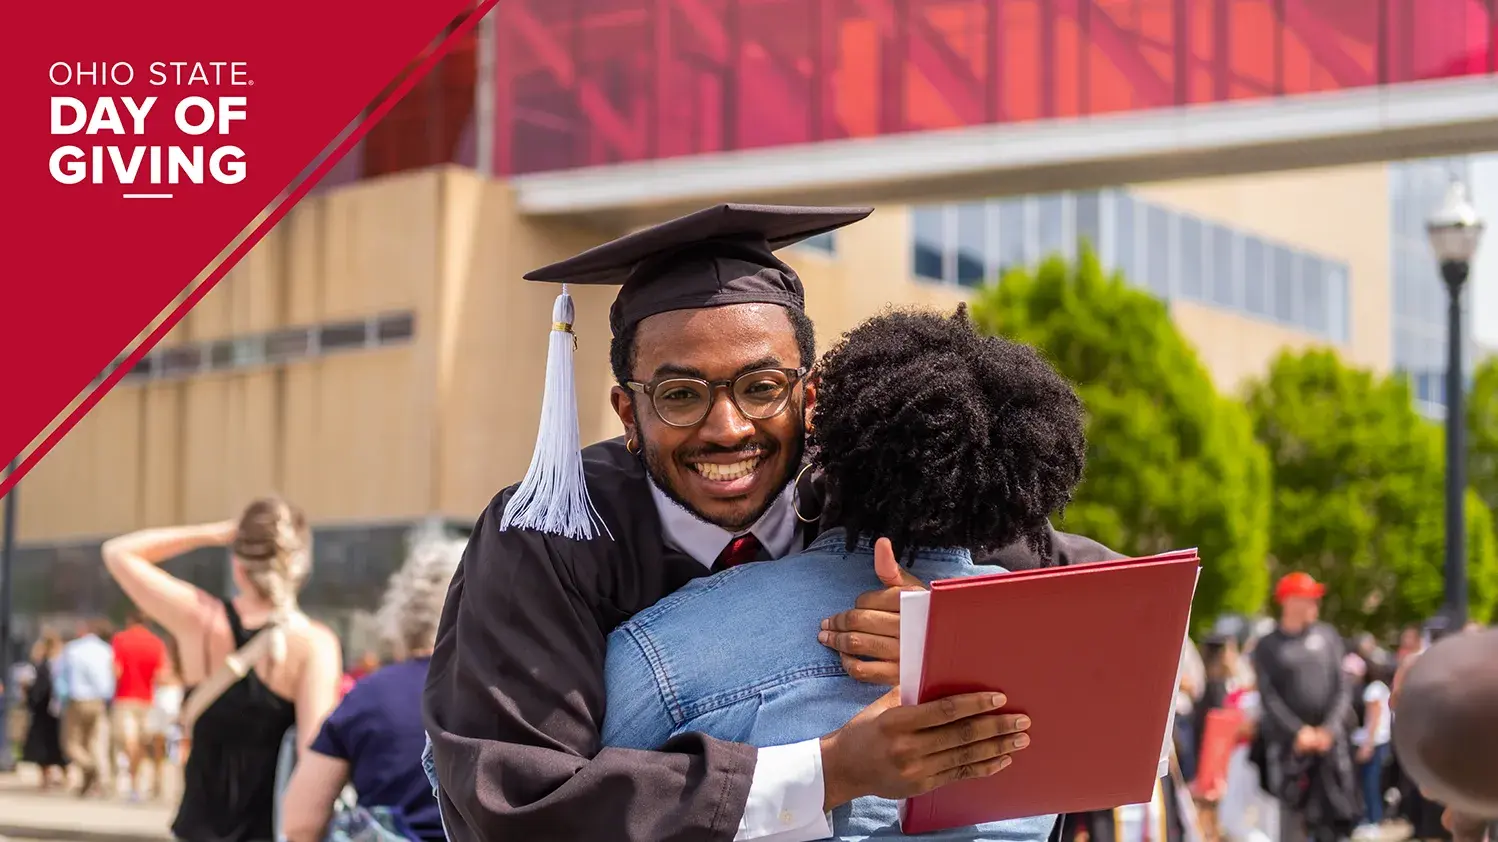 A graduate wearing a cap and gown smiles and hugs a person while holding a diploma